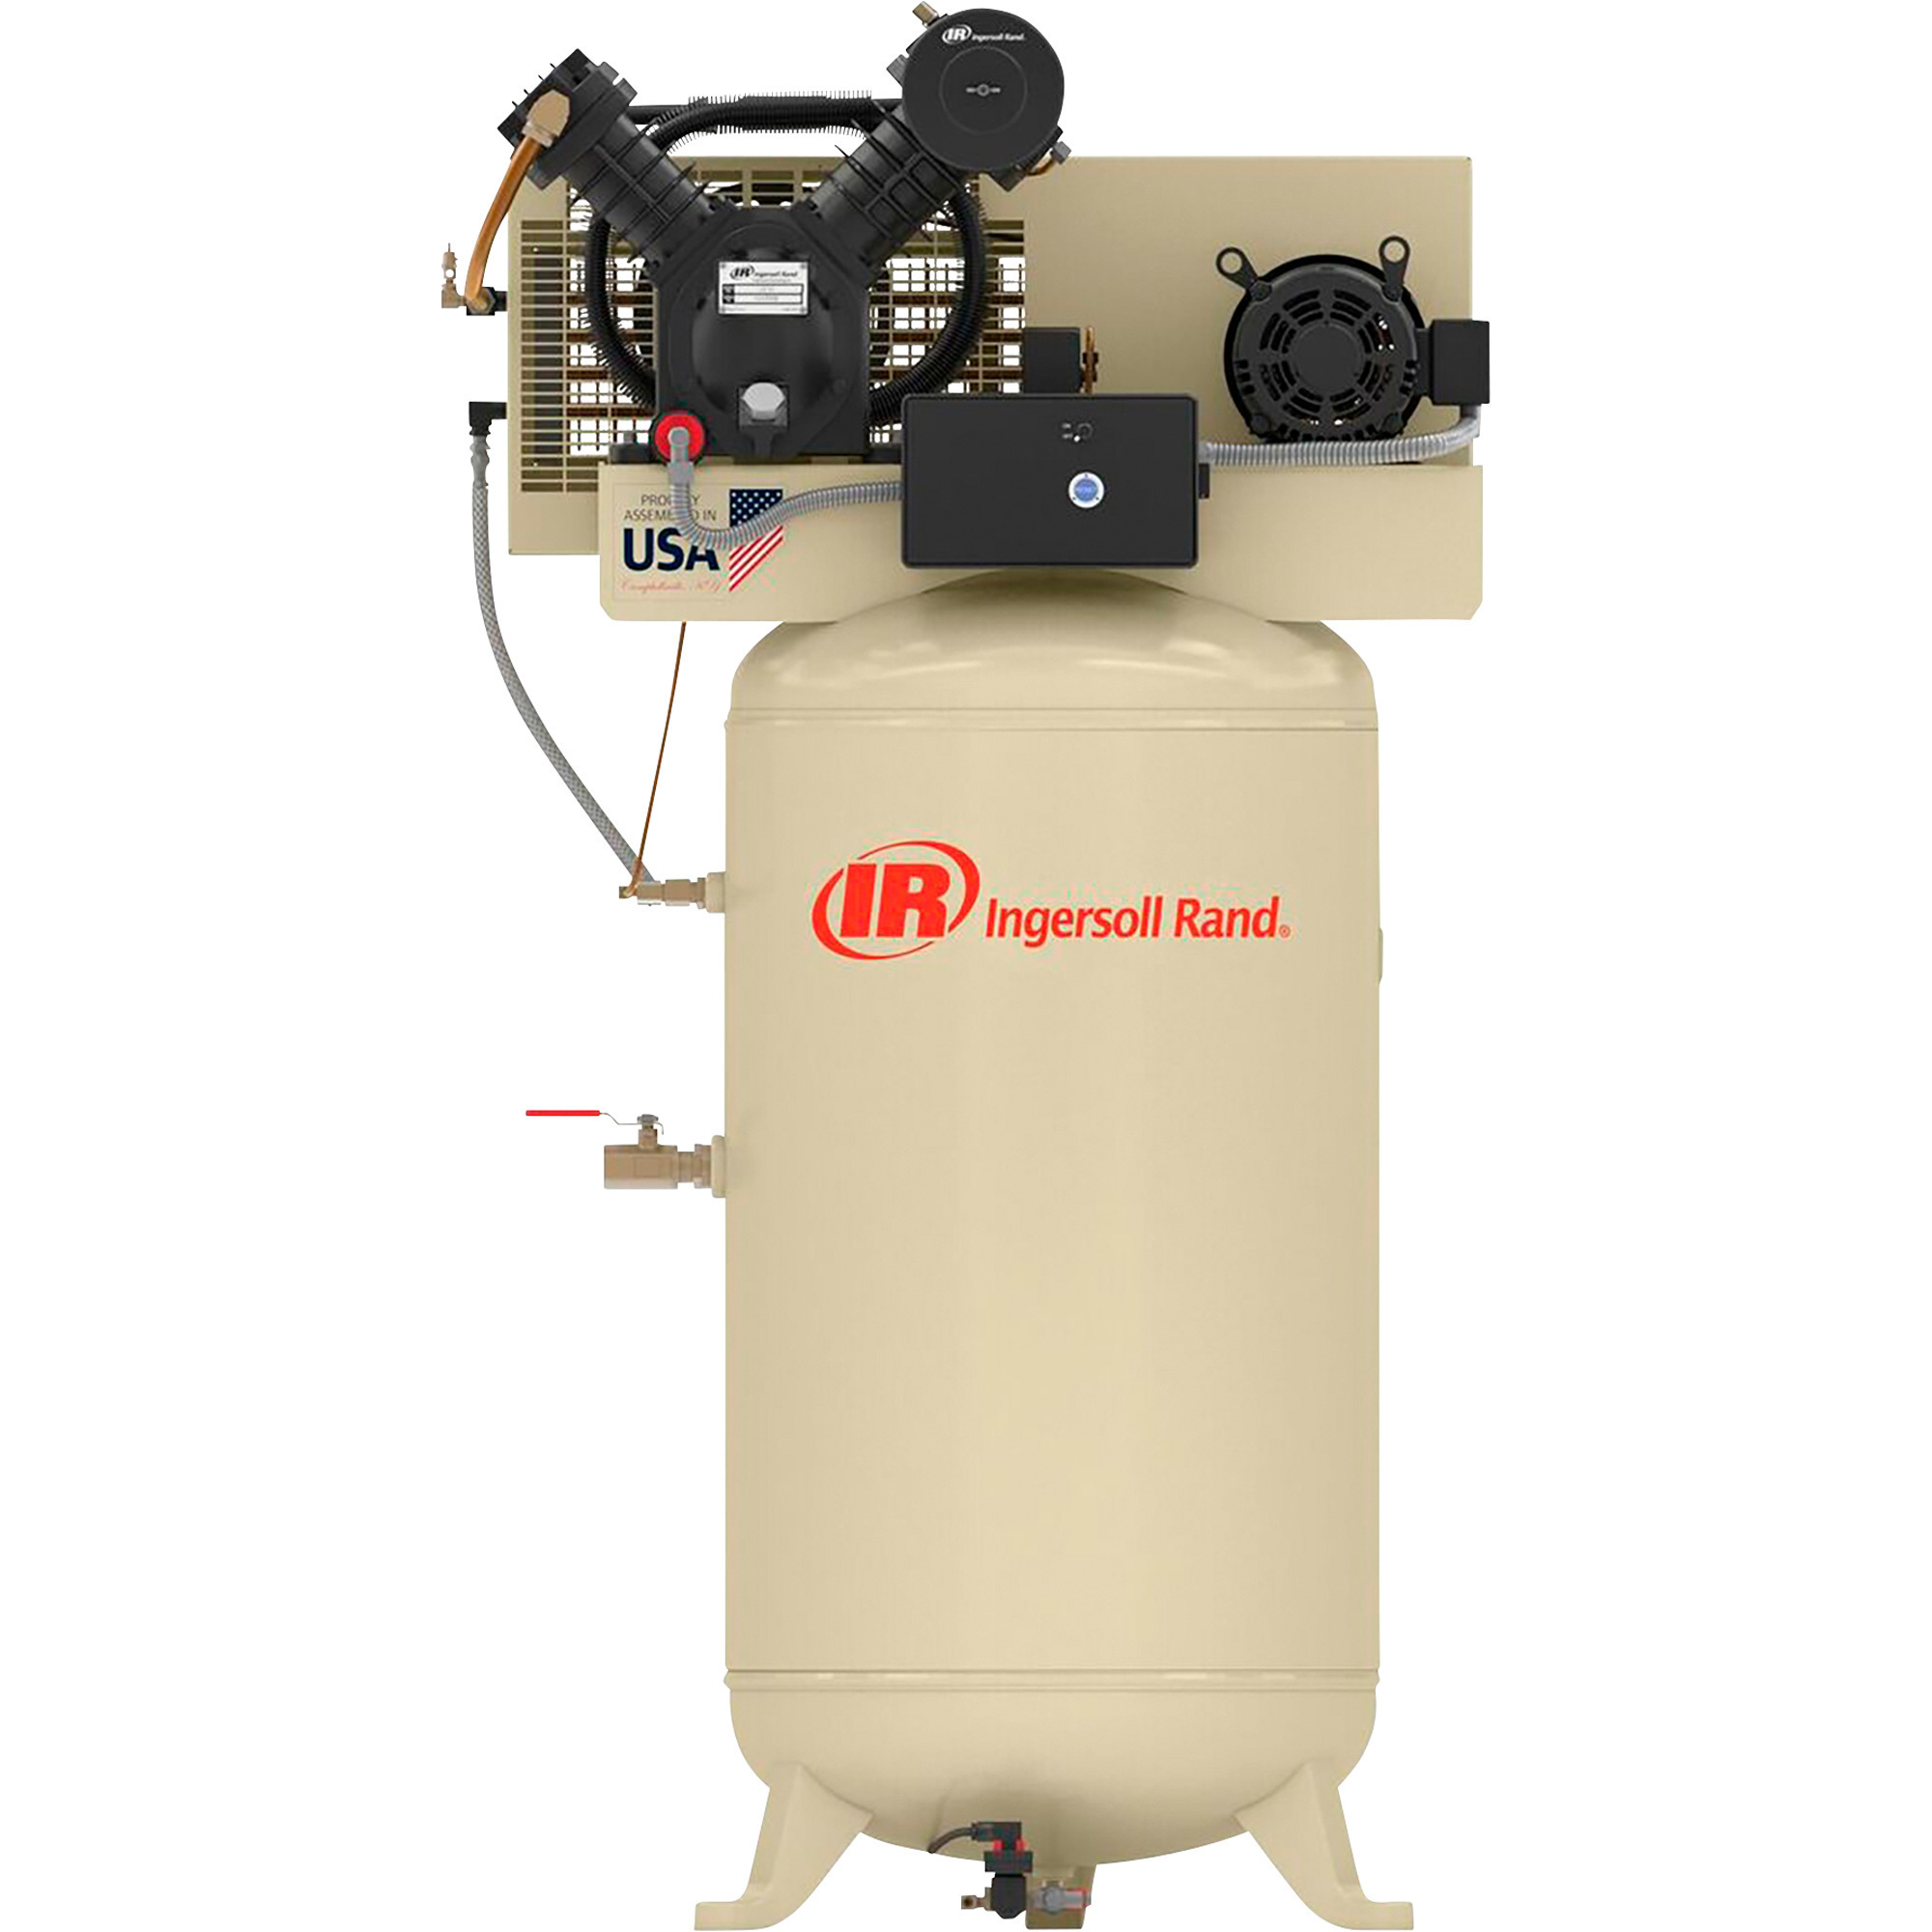 Ingersoll Rand Type-30 Reciprocating Air Compressor (Premium Package), 5 HP, 460 Volt, 3 Phase, 80 Gallon, Model 2475N5FP